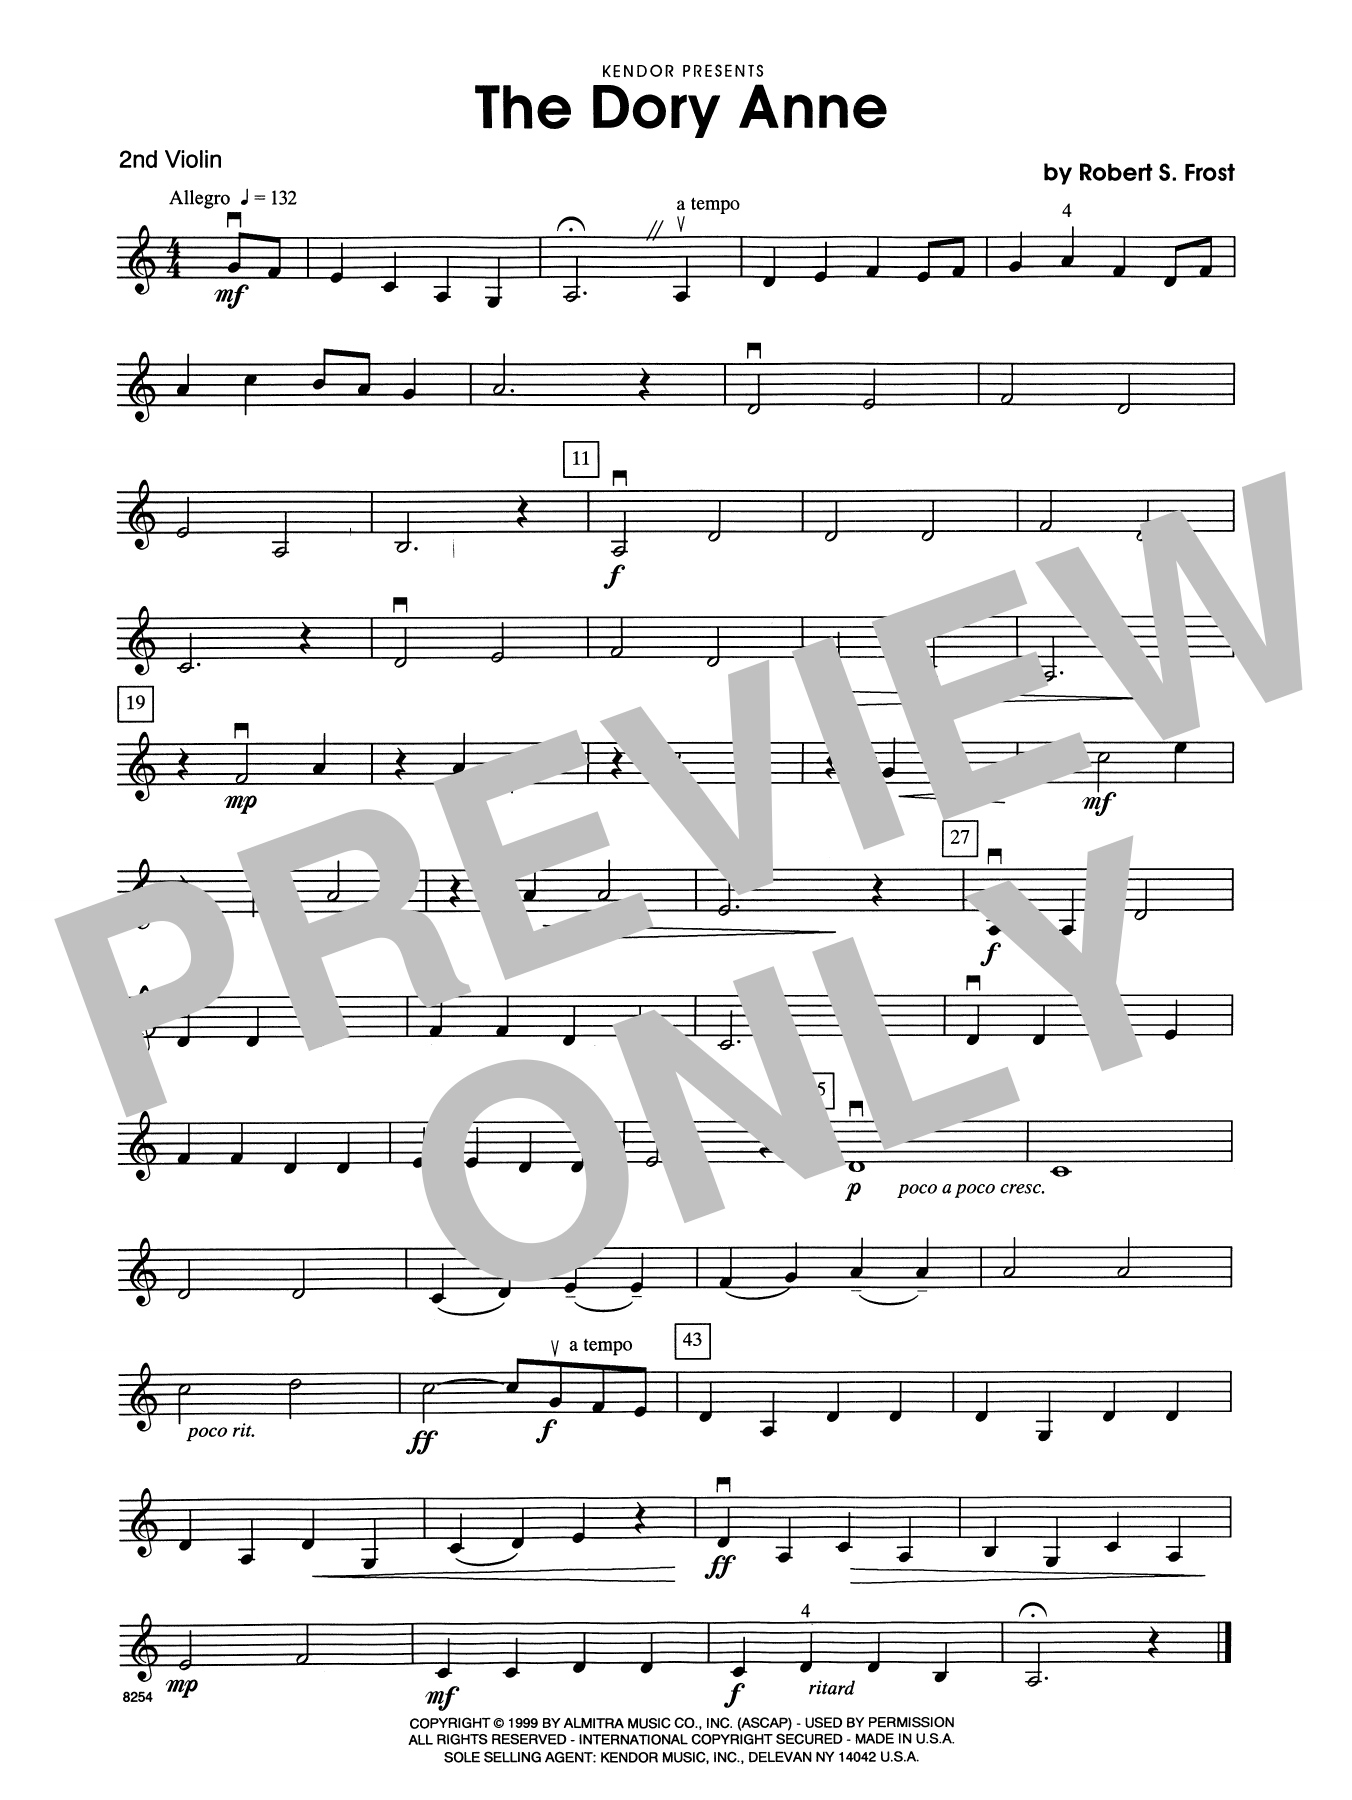 Download Robert S. Frost The Dory Anne - 2nd Violin Sheet Music